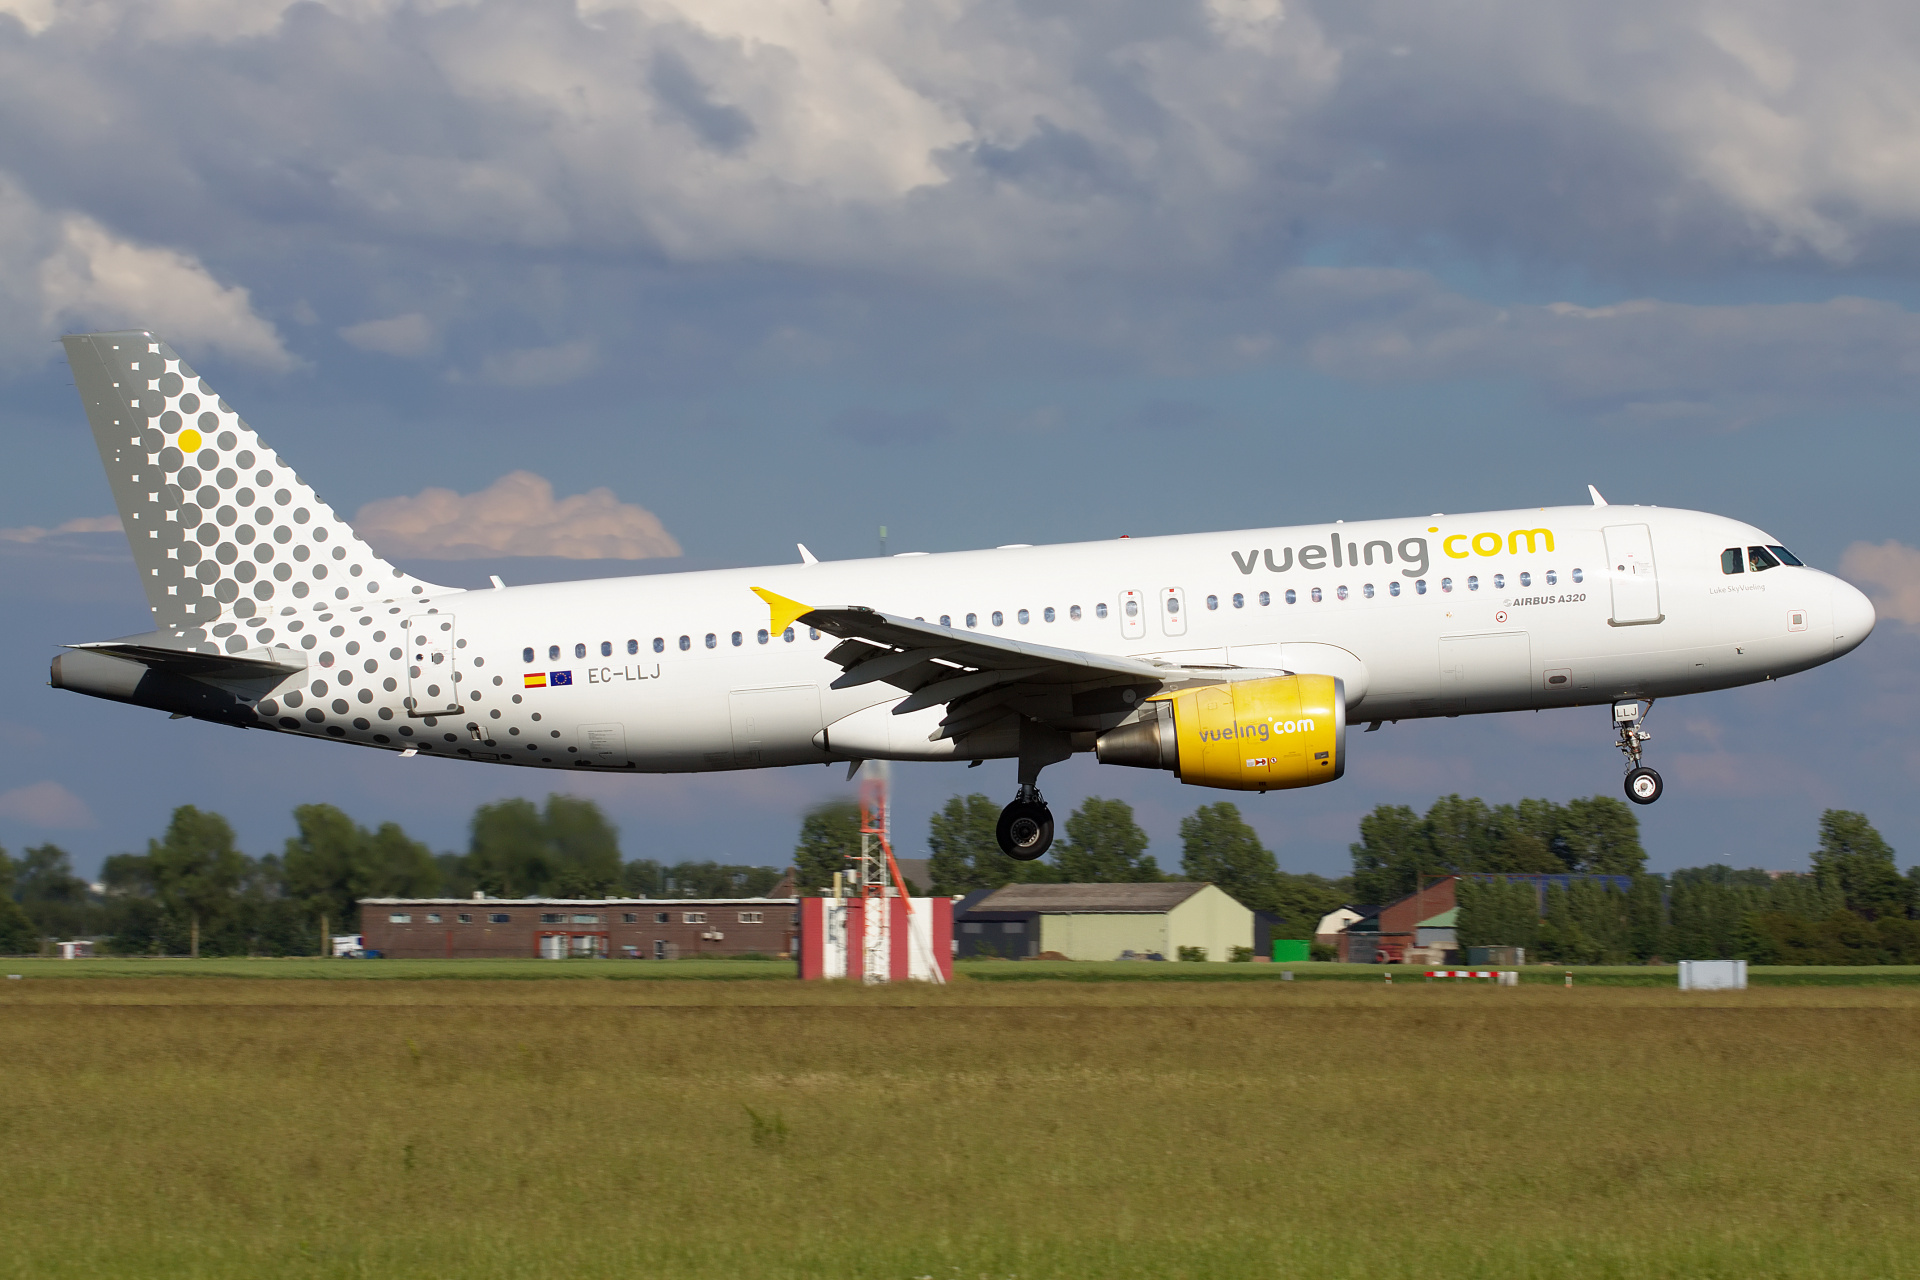 EC-LLJ (Aircraft » Schiphol Spotting » Airbus A320-200 » Vueling Airlines)